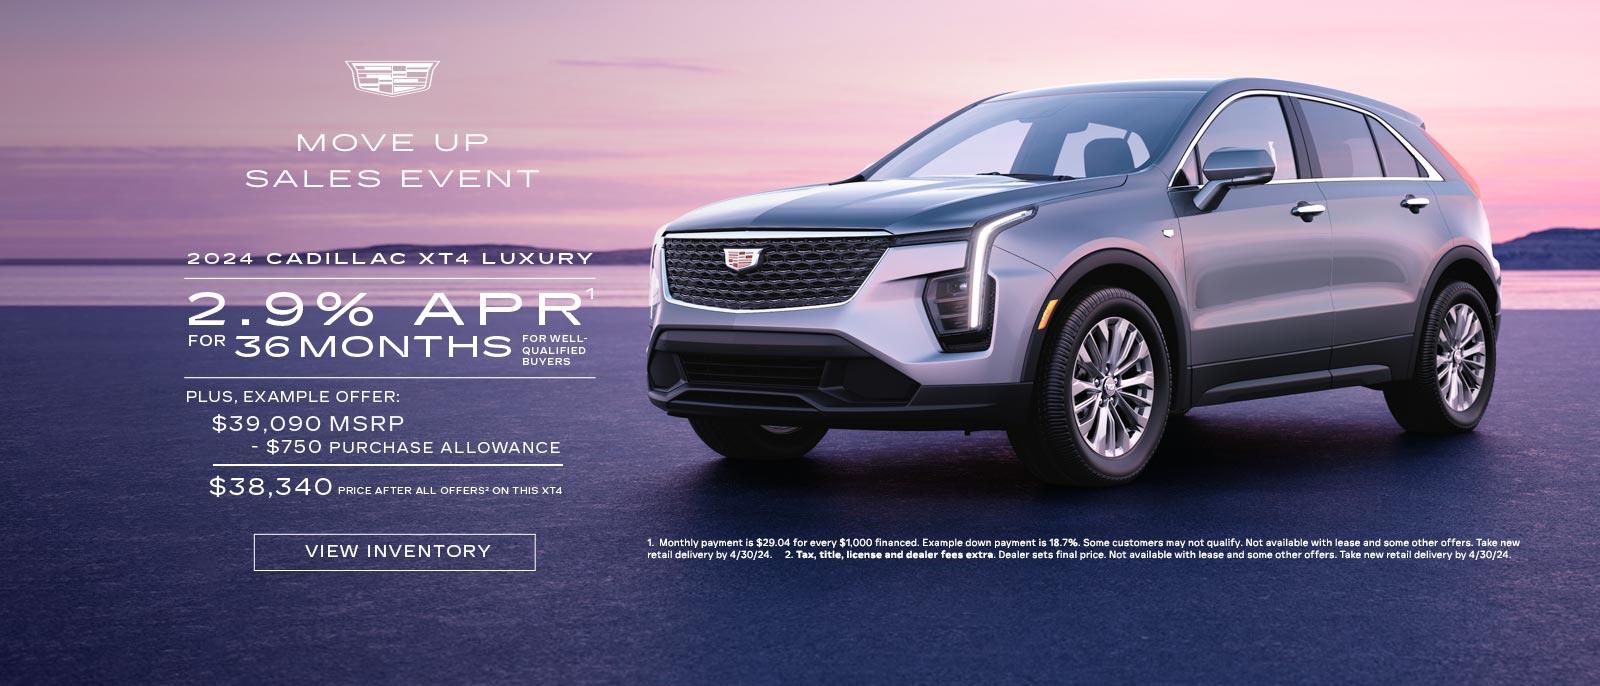 2024 CADILLAC XT4. 2.9% APR for 36 months for well qualified buyers.